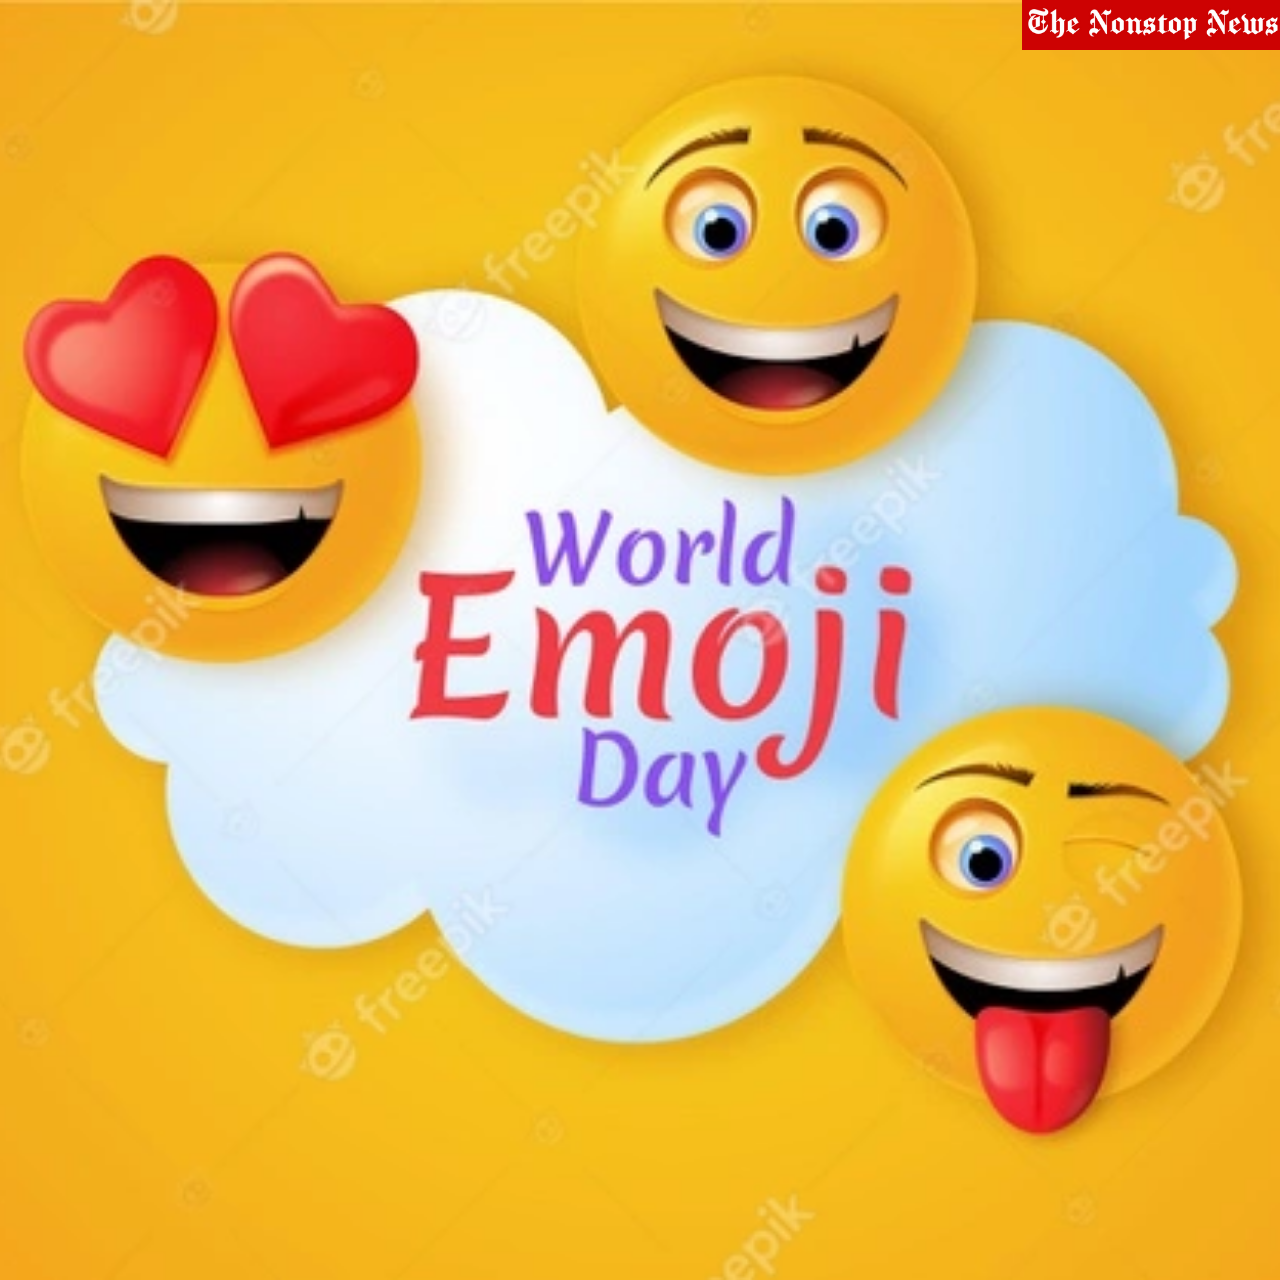 World Emoji Day 2021 Quotes, Wishes, Social Posts, Messages, Meme, Clipart, Greetings, and Drawing to Share